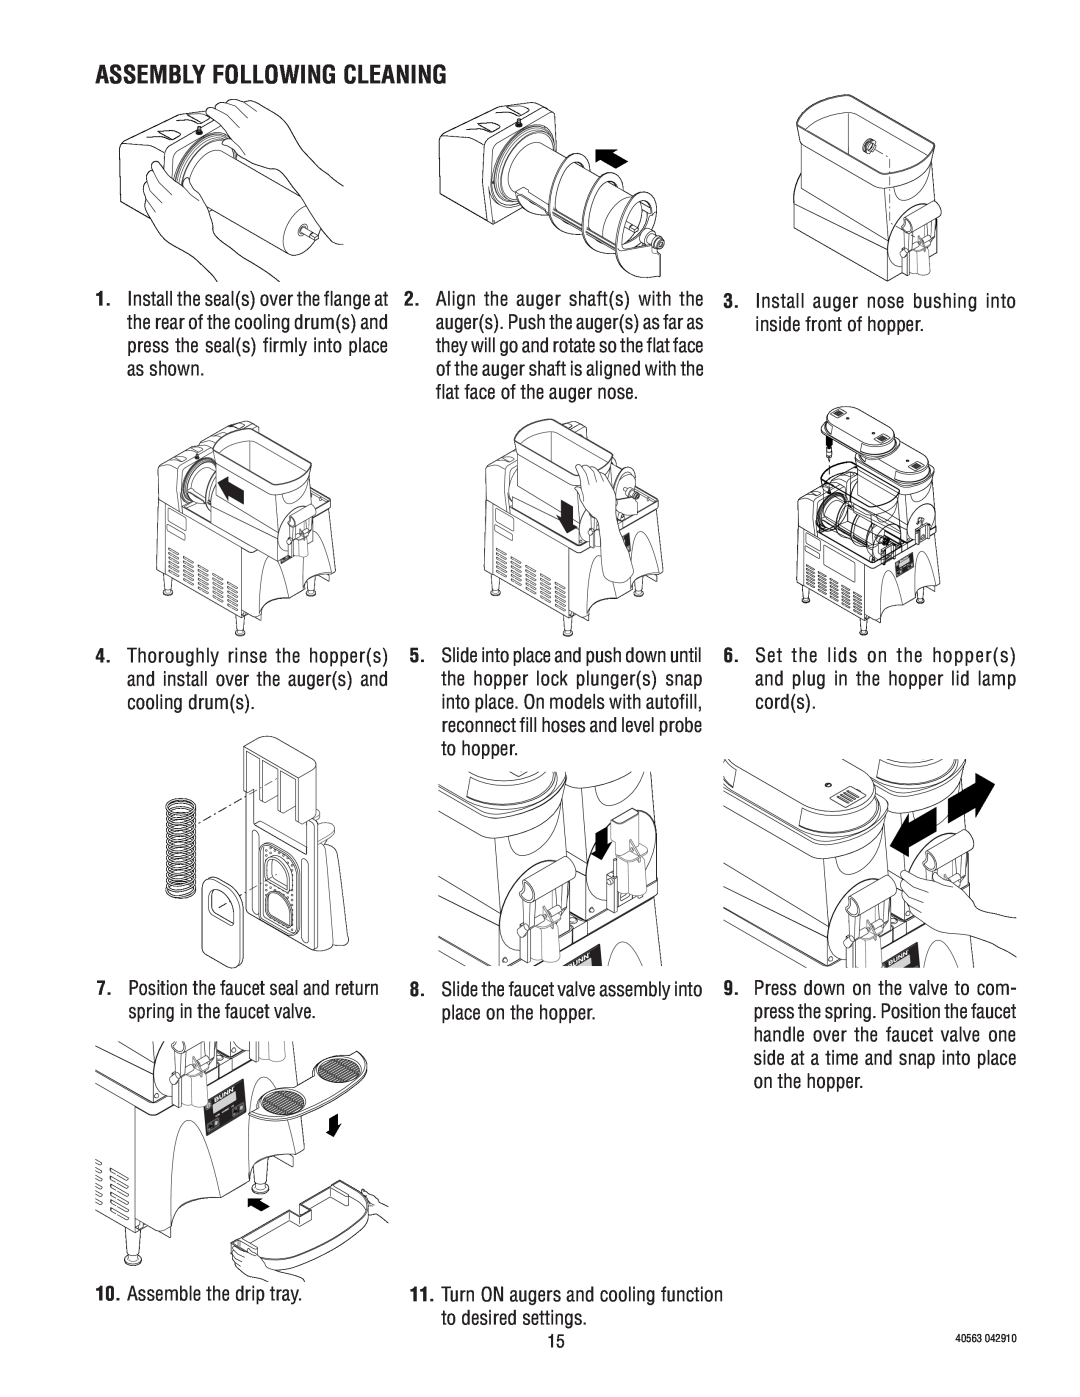 Bunn ULTRA-1 service manual Assembly Following Cleaning 